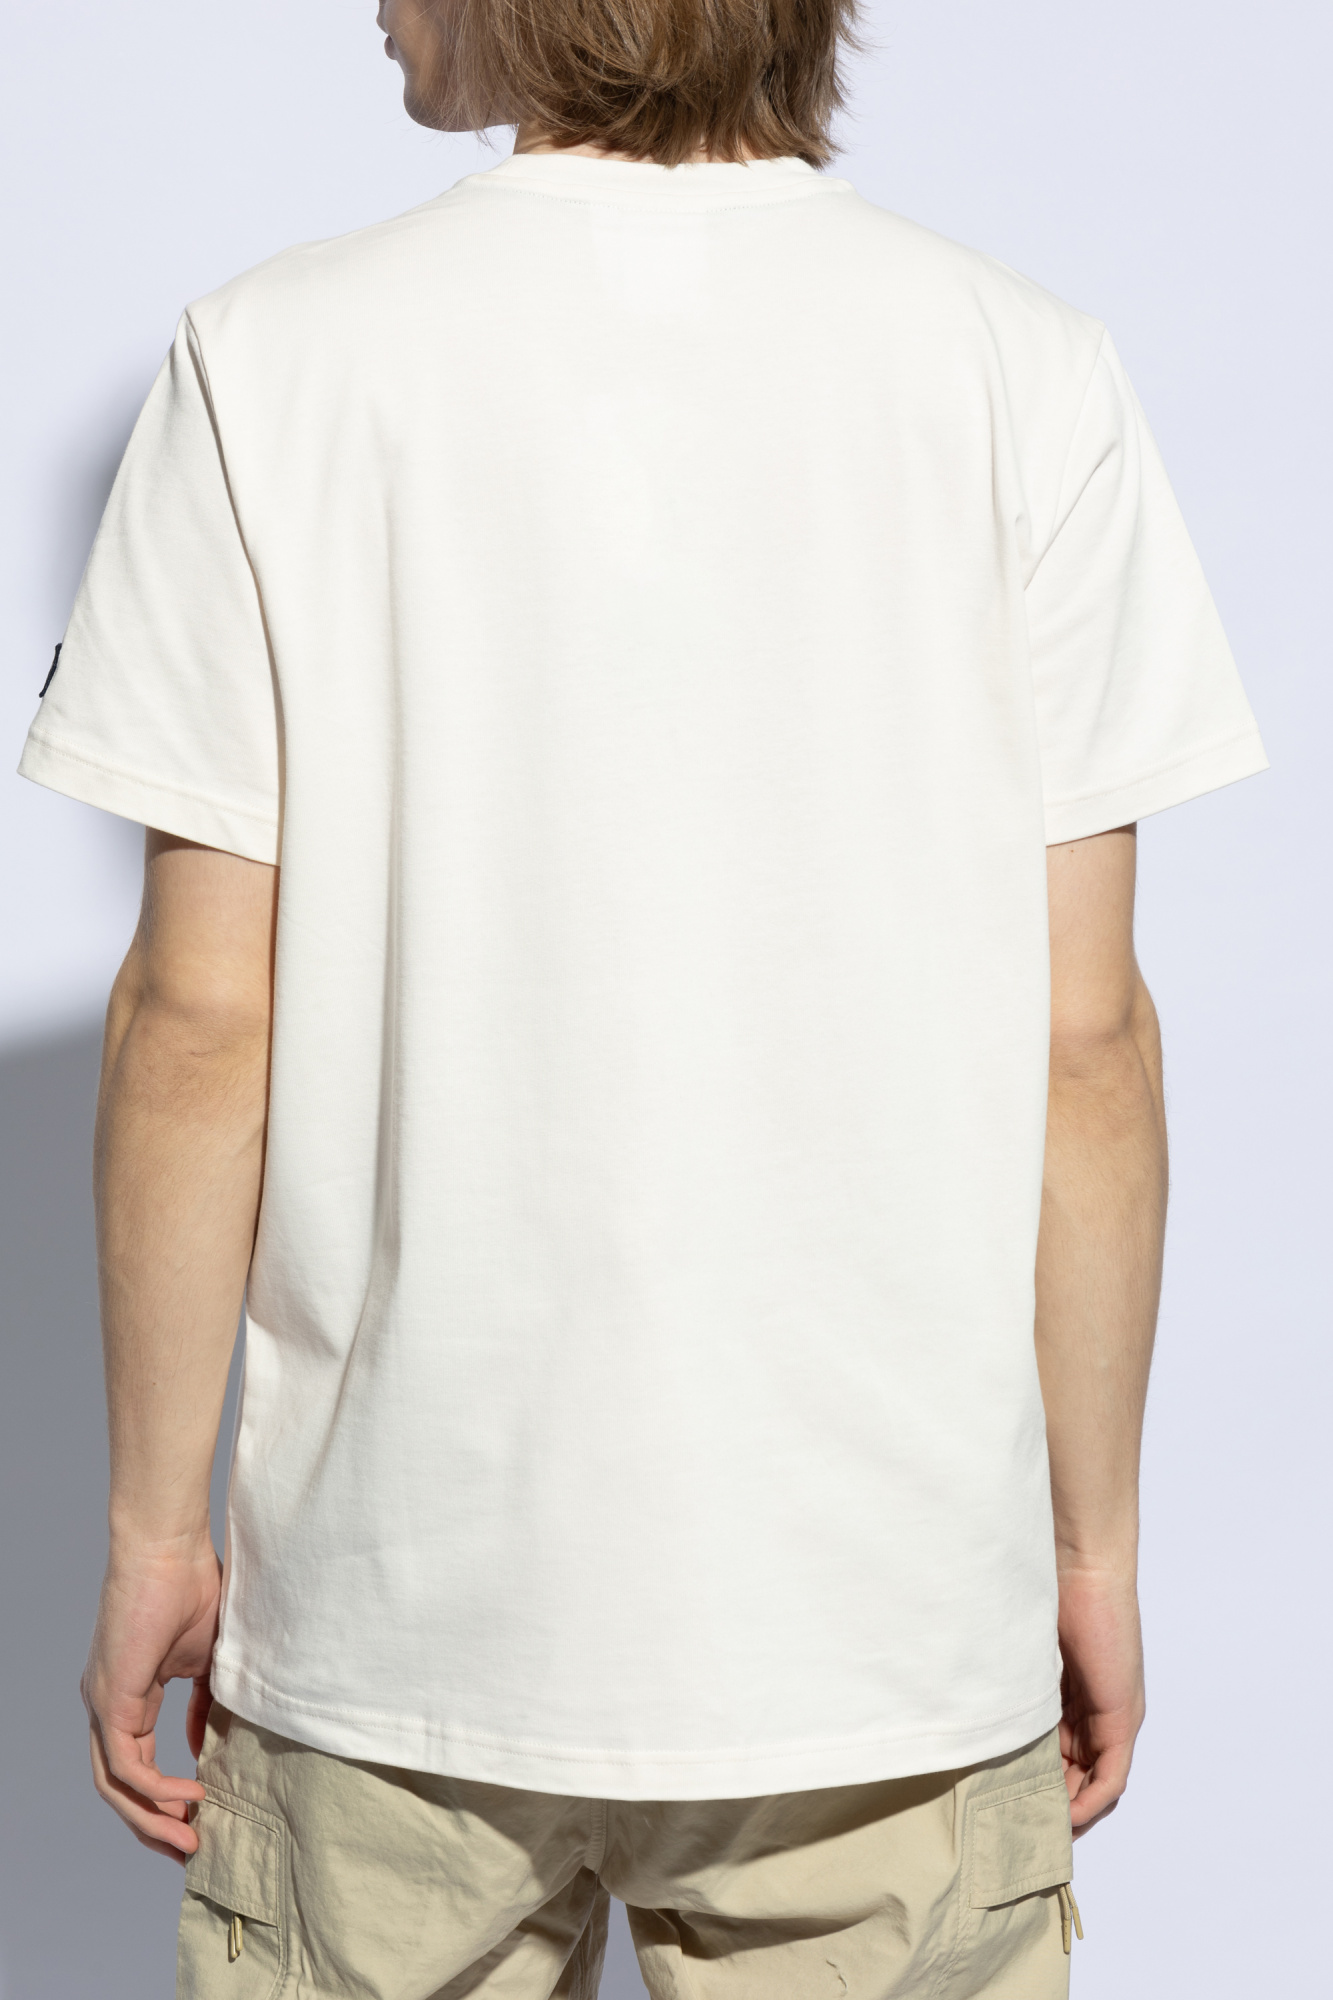 White T-shirt from the 'Spezial' collection ADIDAS Originals 